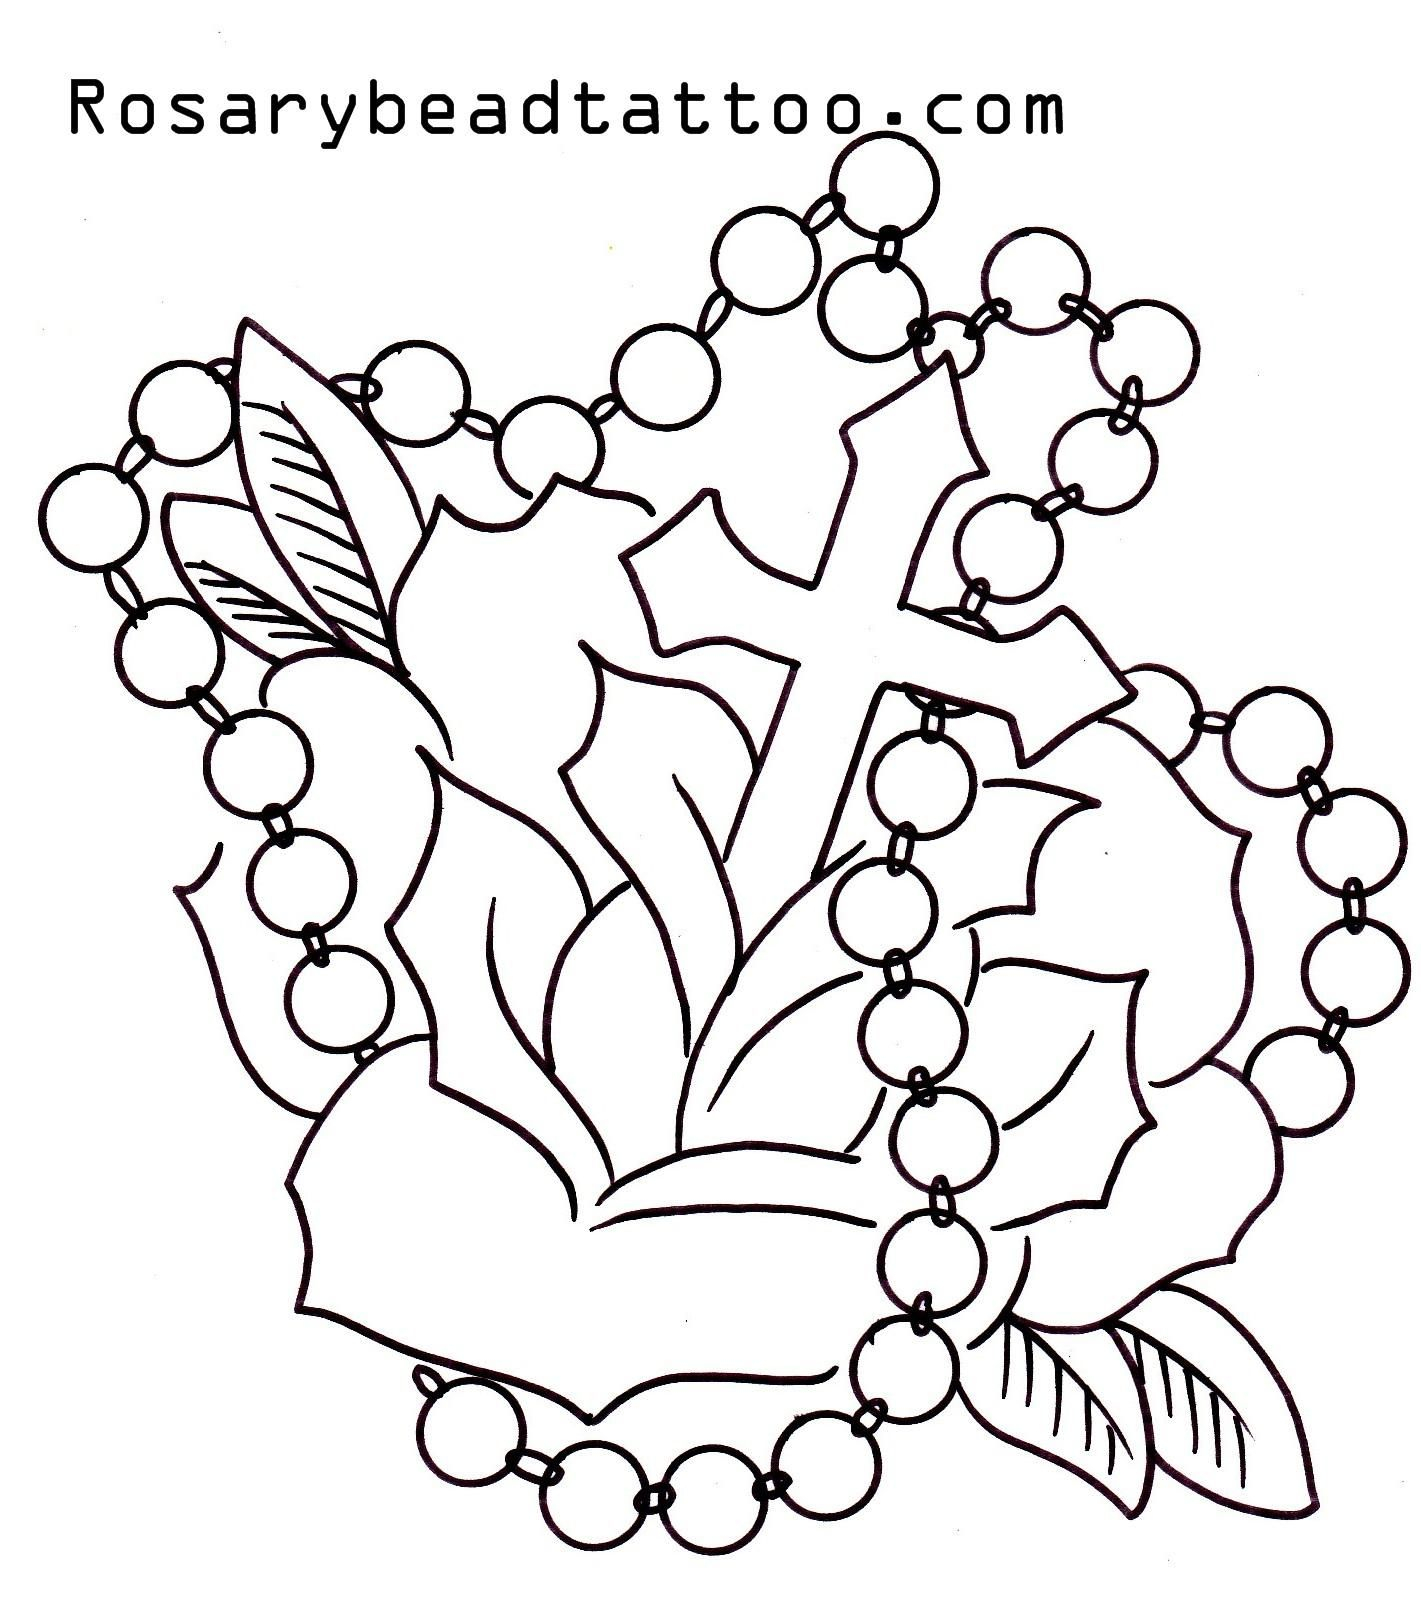 Flower With Roseary Stencils Rosary Tattoocross Tattoo Design within dimensions 1421 X 1610